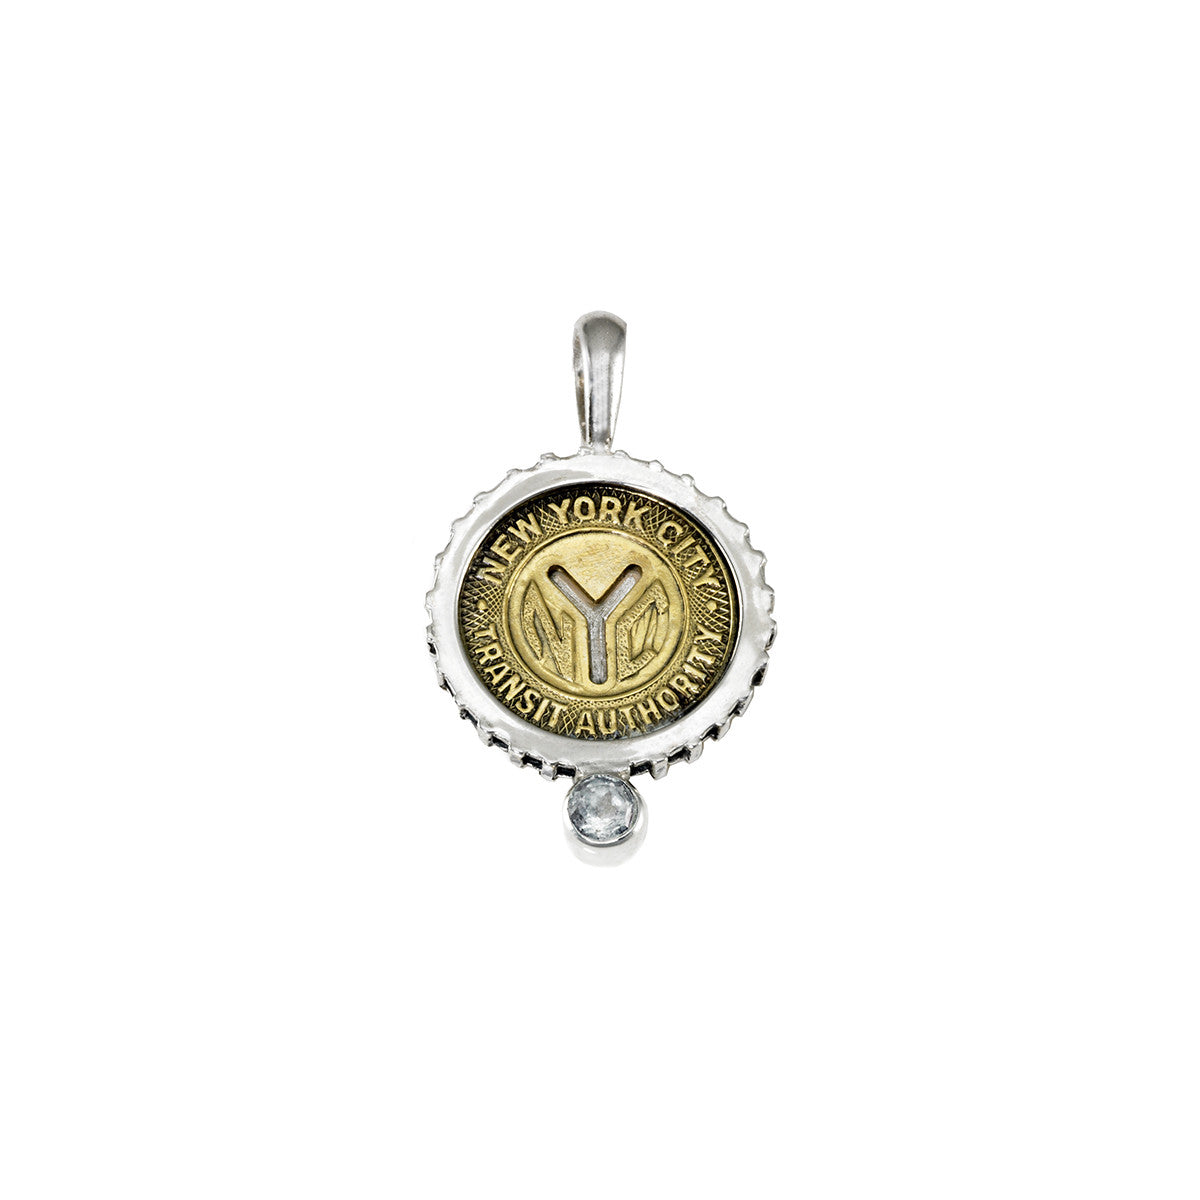 April NYC Authentic Subway Token White Topaz Sterling Silver Charm Necklace - Cynthia Gale New York - 1